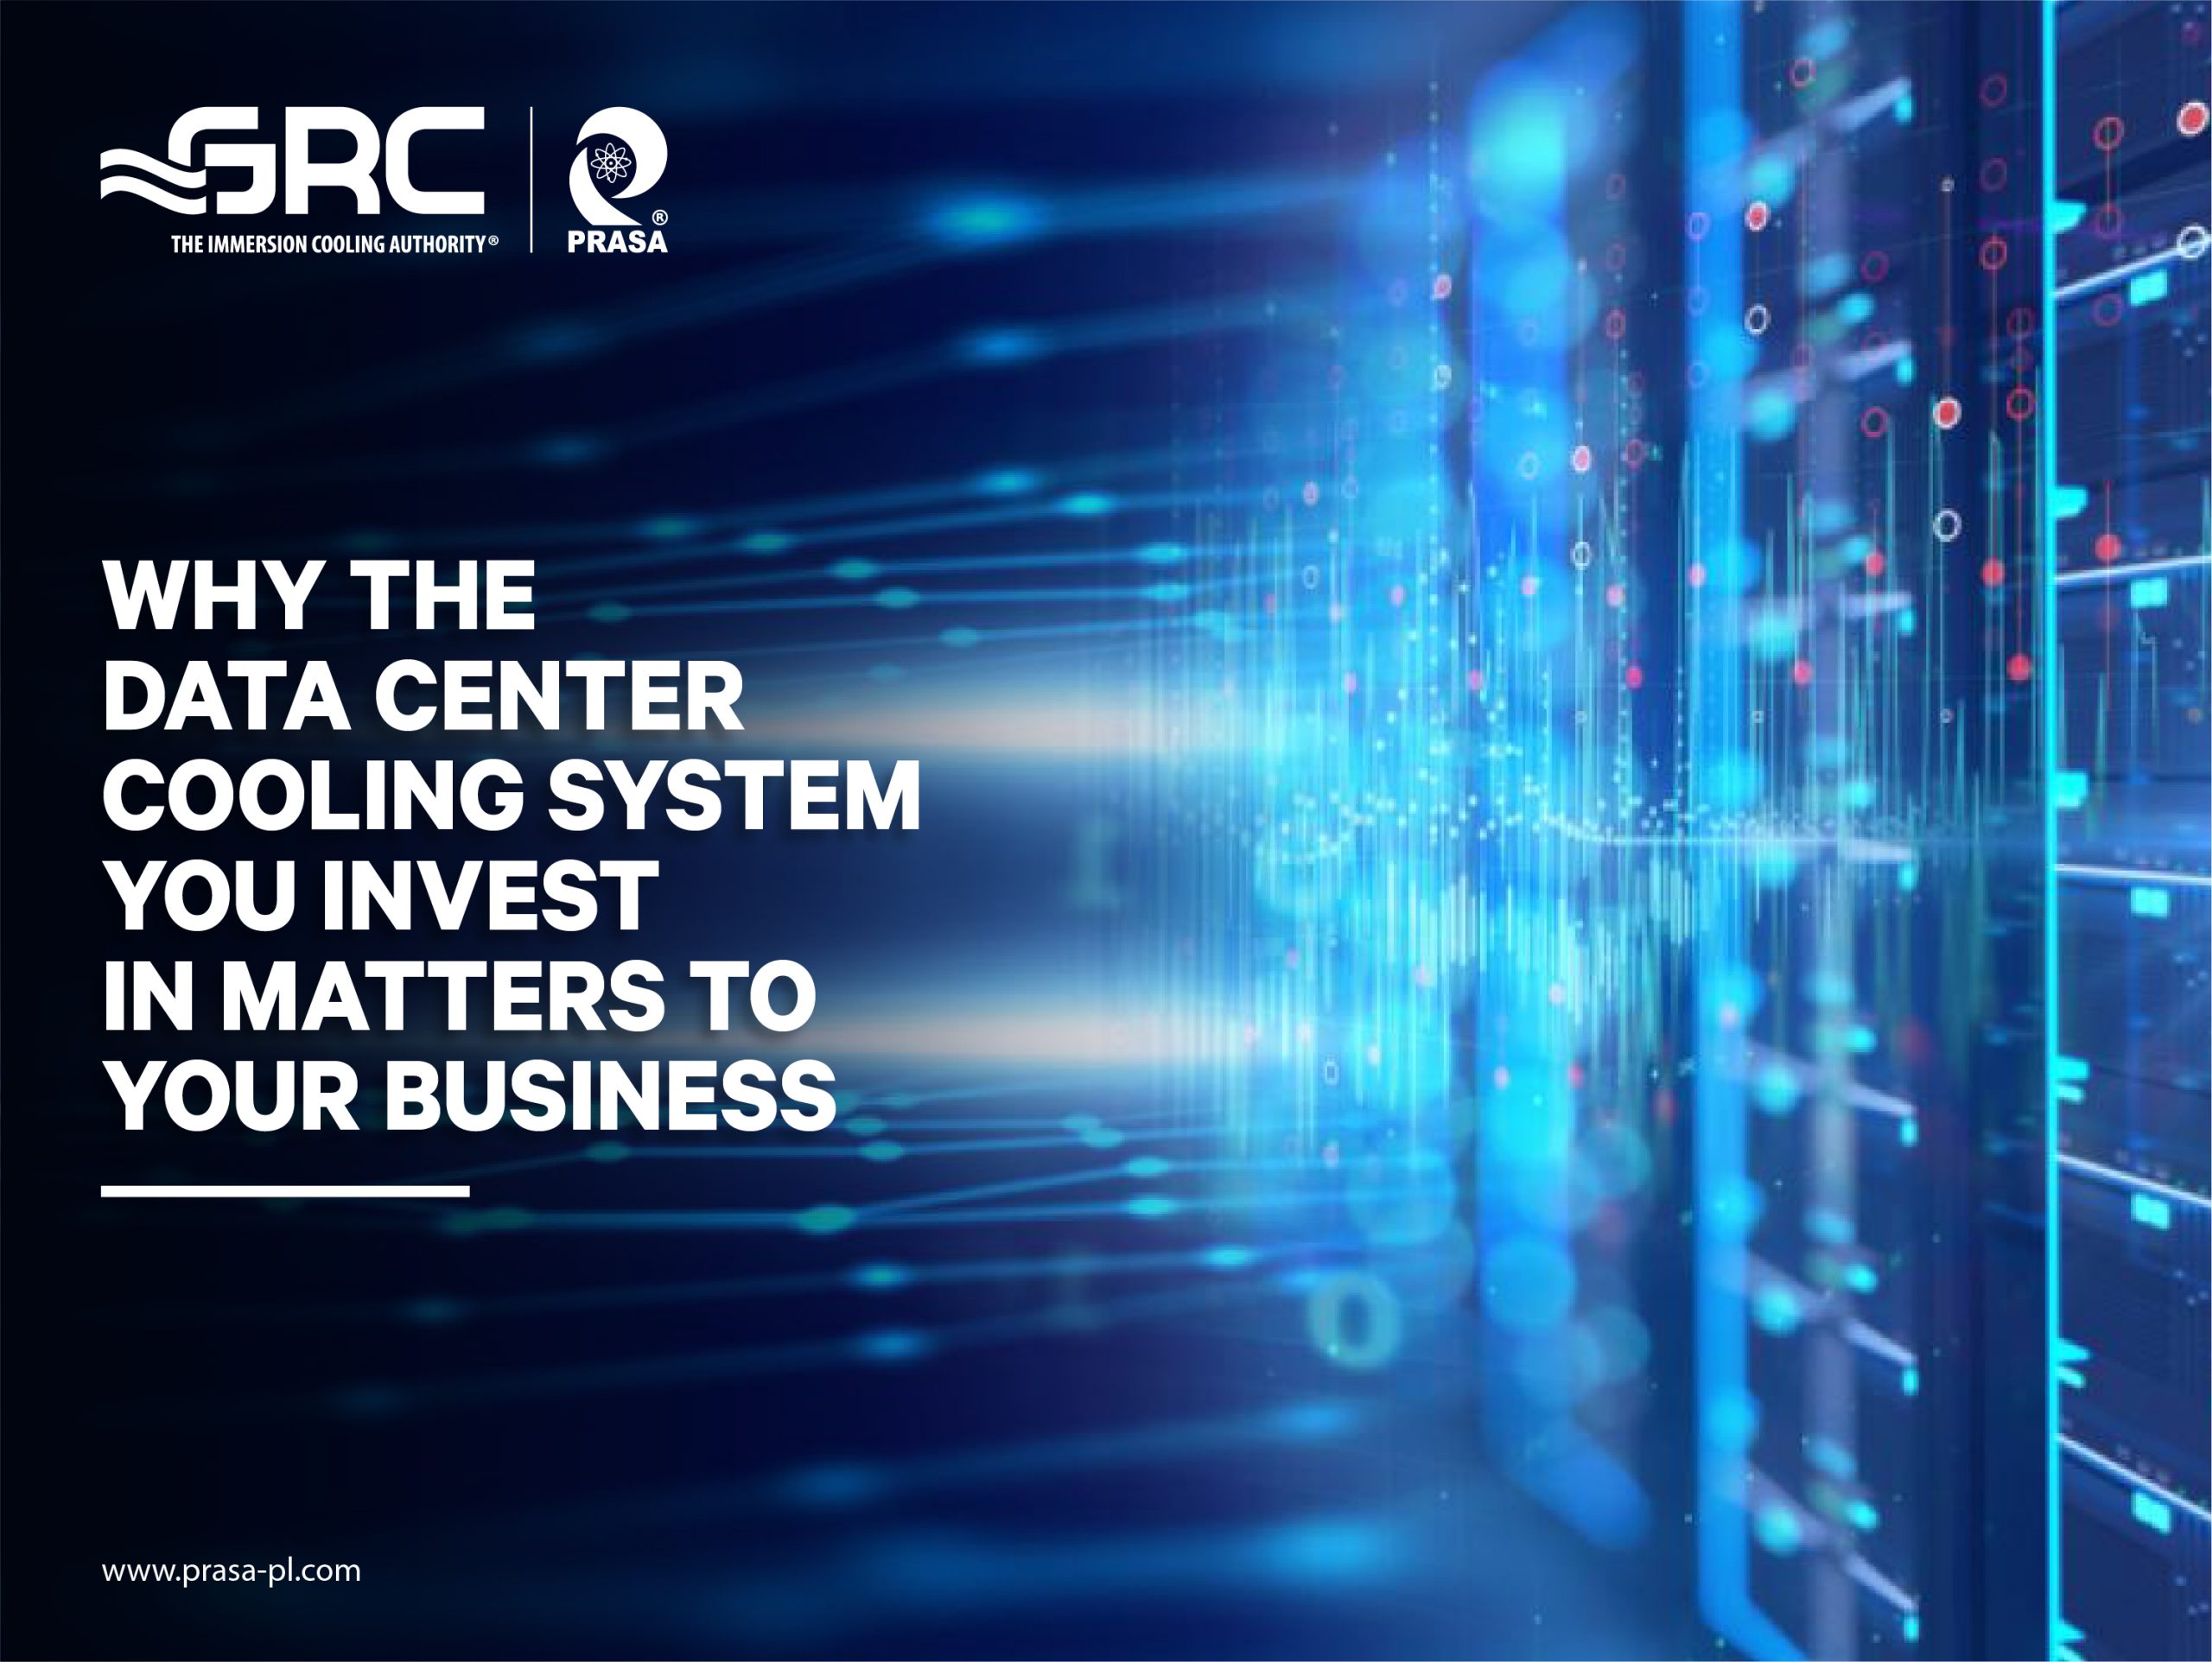 <strong>Why the Data Center Cooling System You Invest in Matters to Your Business</strong>